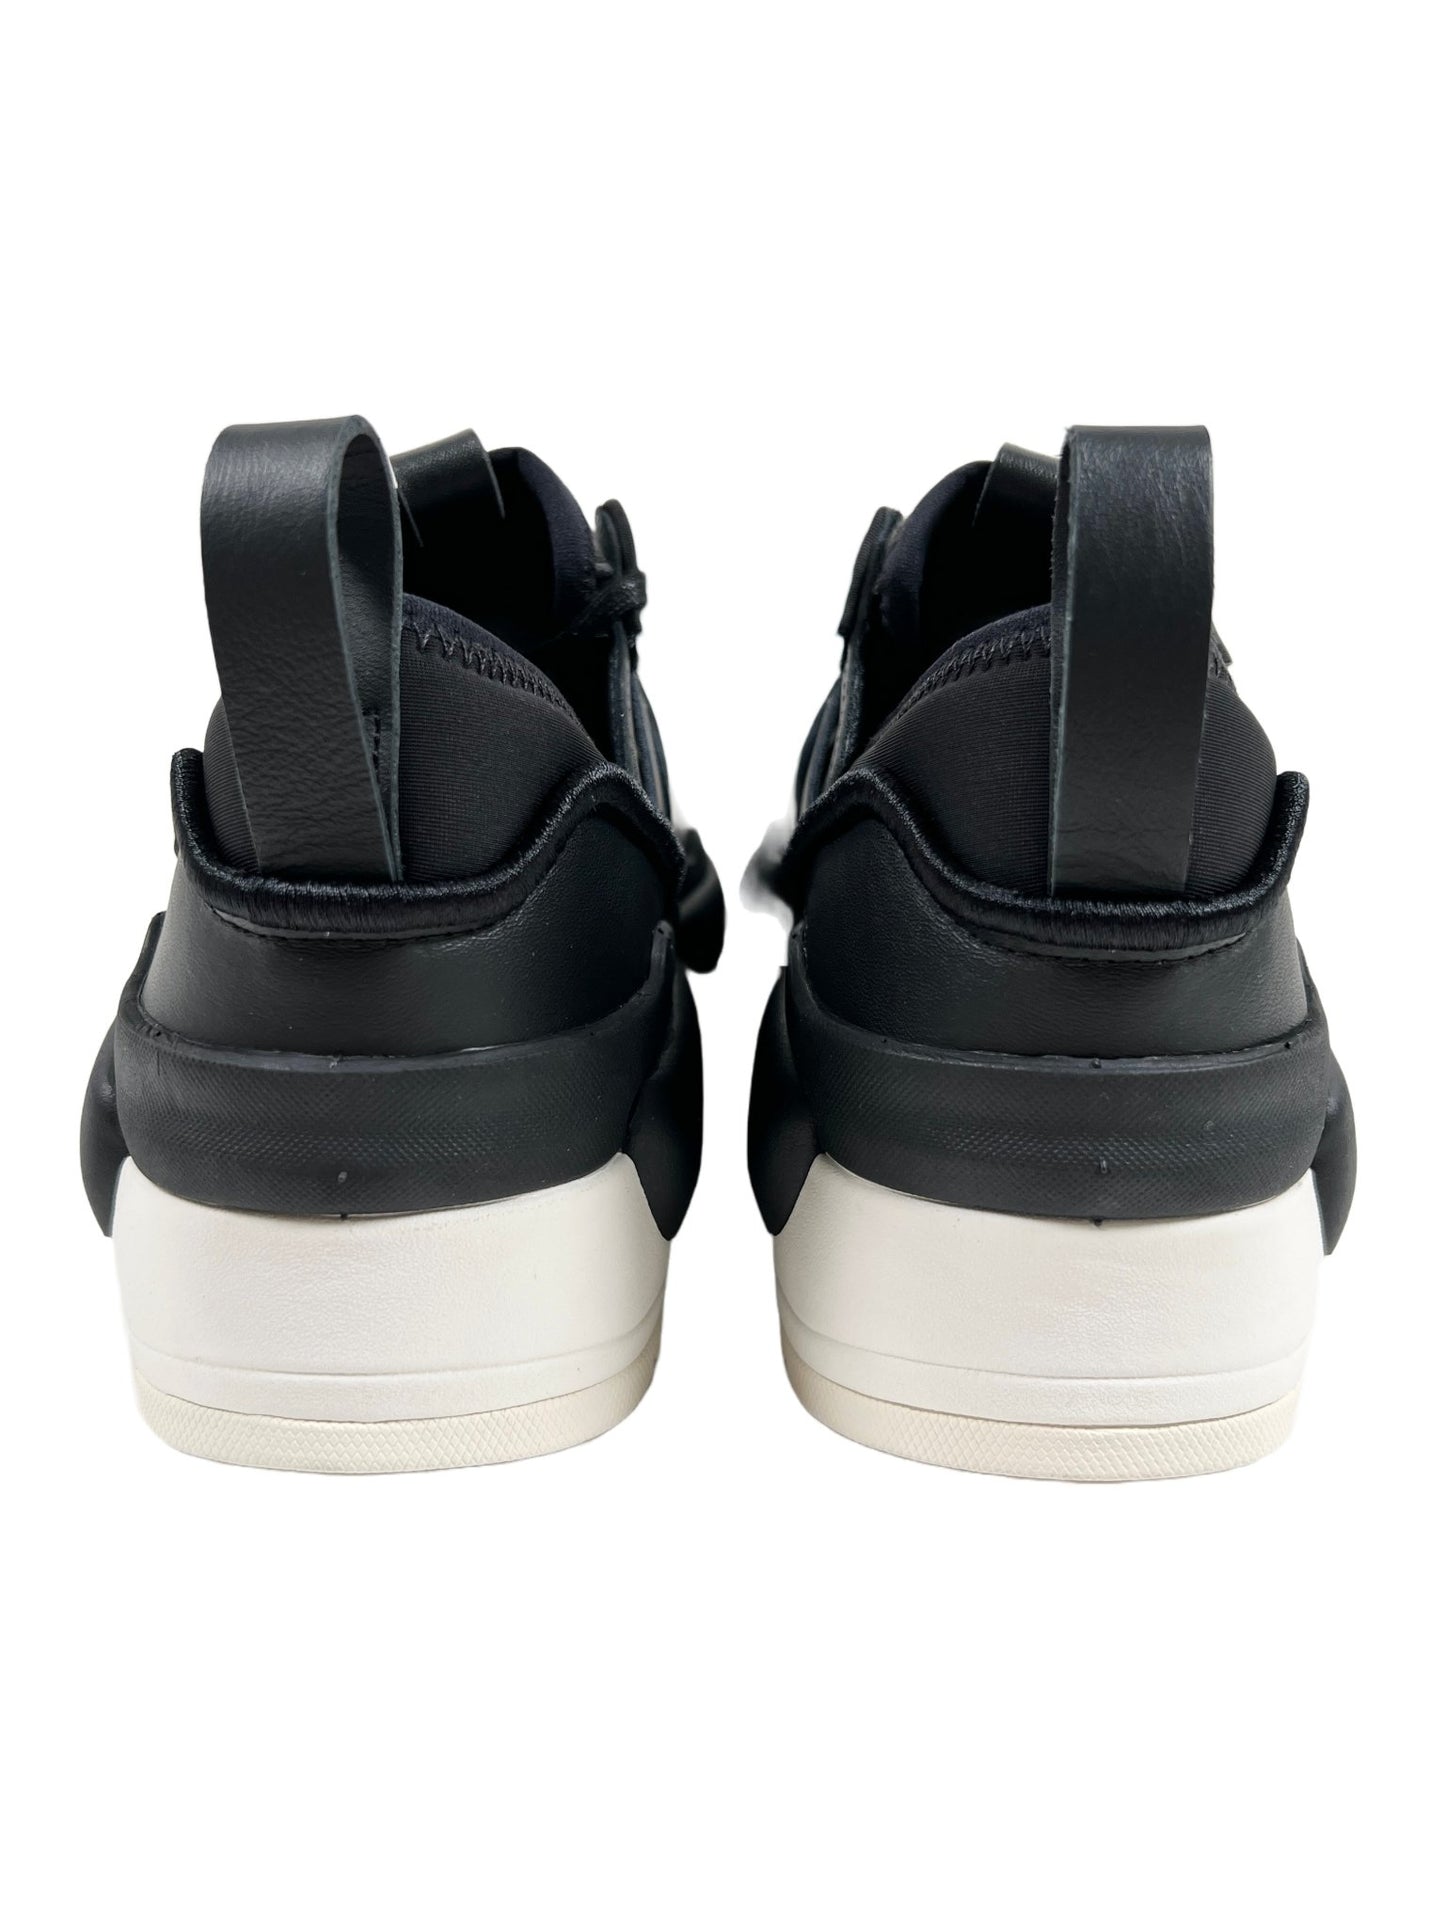 A pair of ADIDAS x Y-3 Rivalry shoes with white soles.